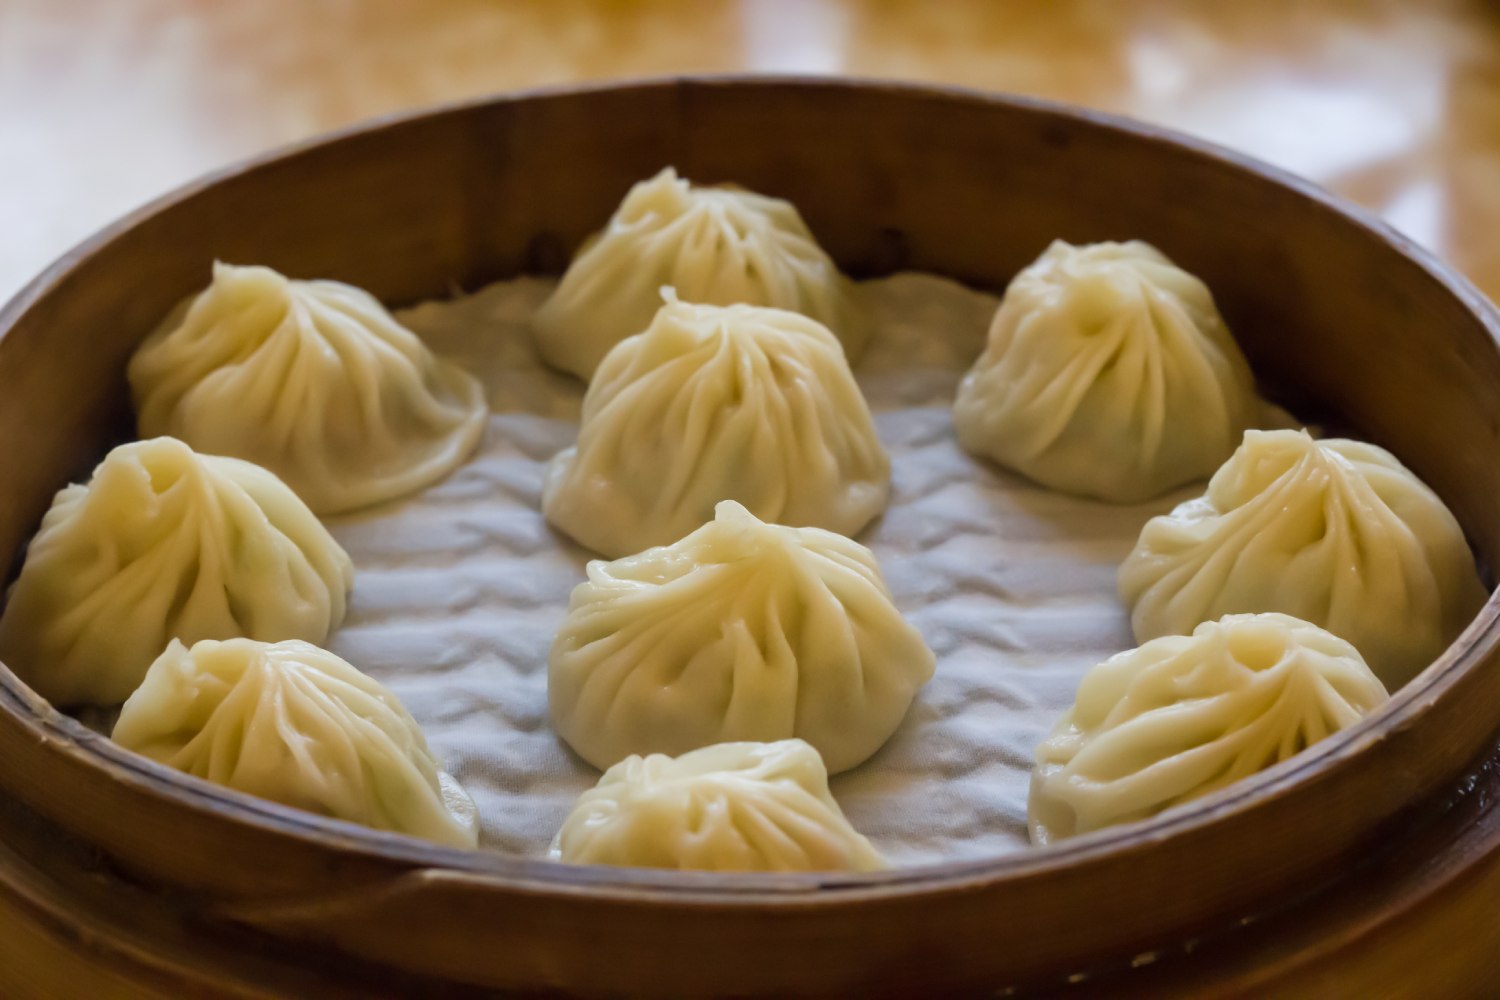 Step-by-Step Procedure for Assembling Xiaolongbao